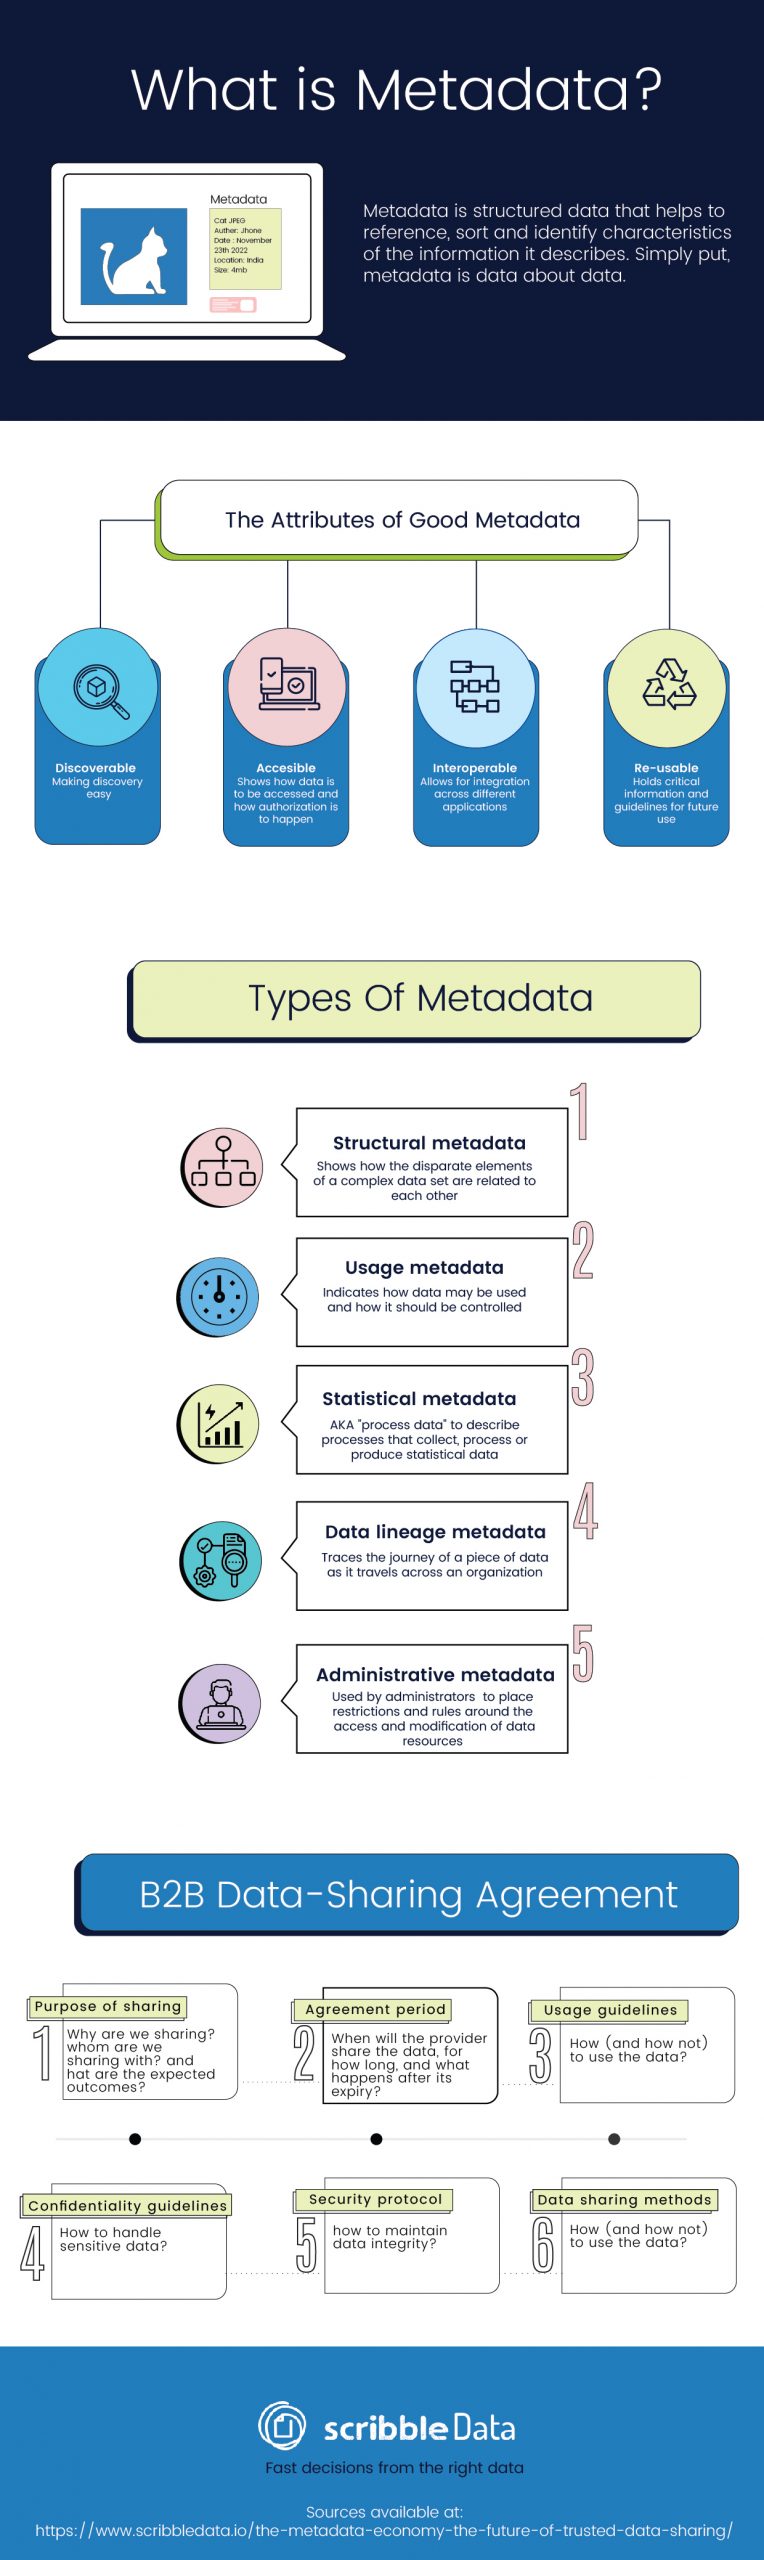 What is metadata? What are the different types of metadata, and what are the different pillars of a typical data sharing agreement? Summary of the metadata blog here.